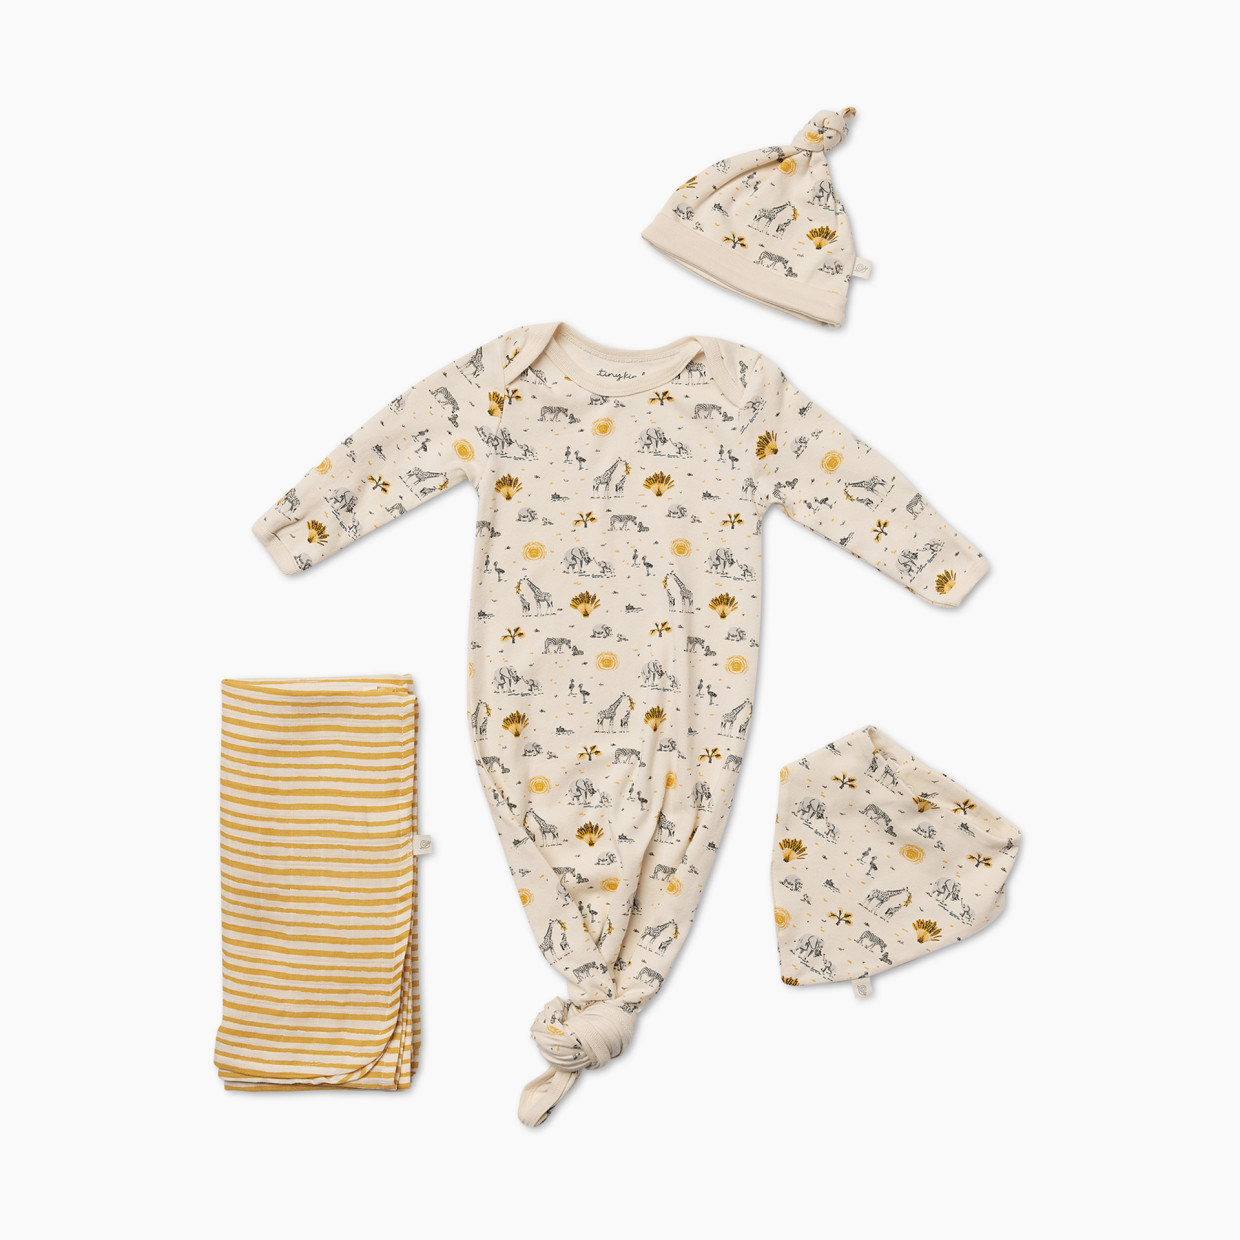 Tiny Kind The Knotted Gown 4 Piece Set - Safari Family, 0-3 M.